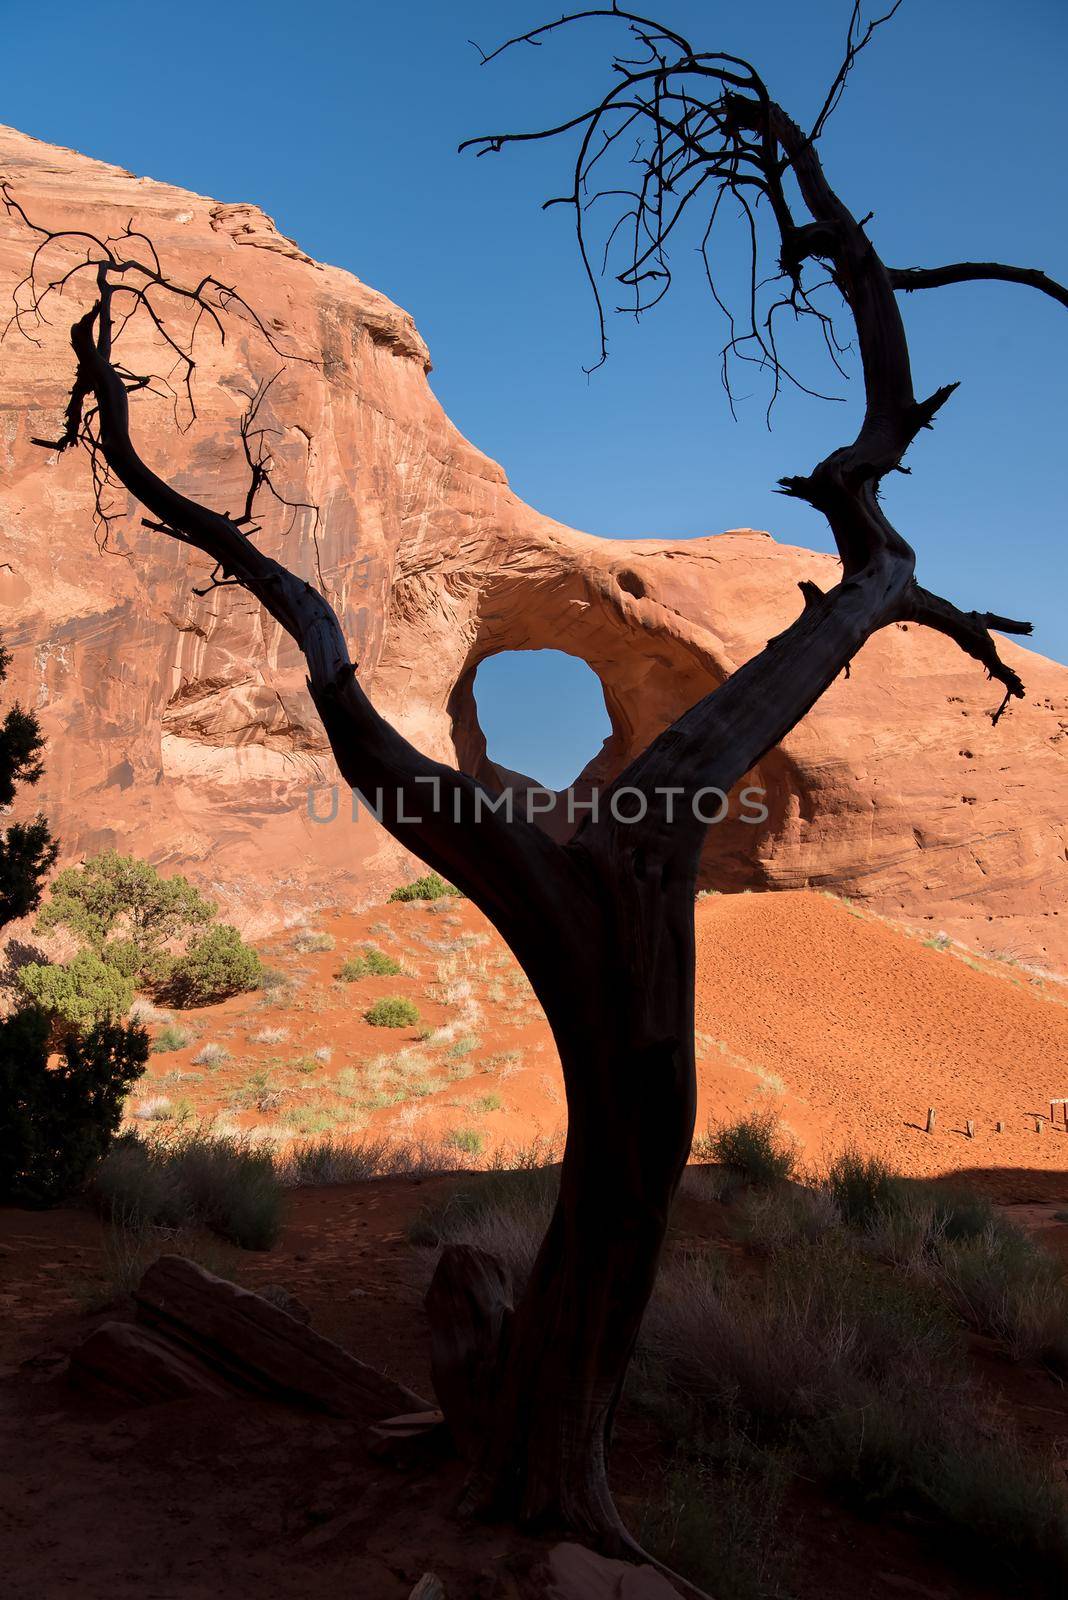 Silhouette of tree scarecrow with natural arch in Monument Valley. Vertical crop